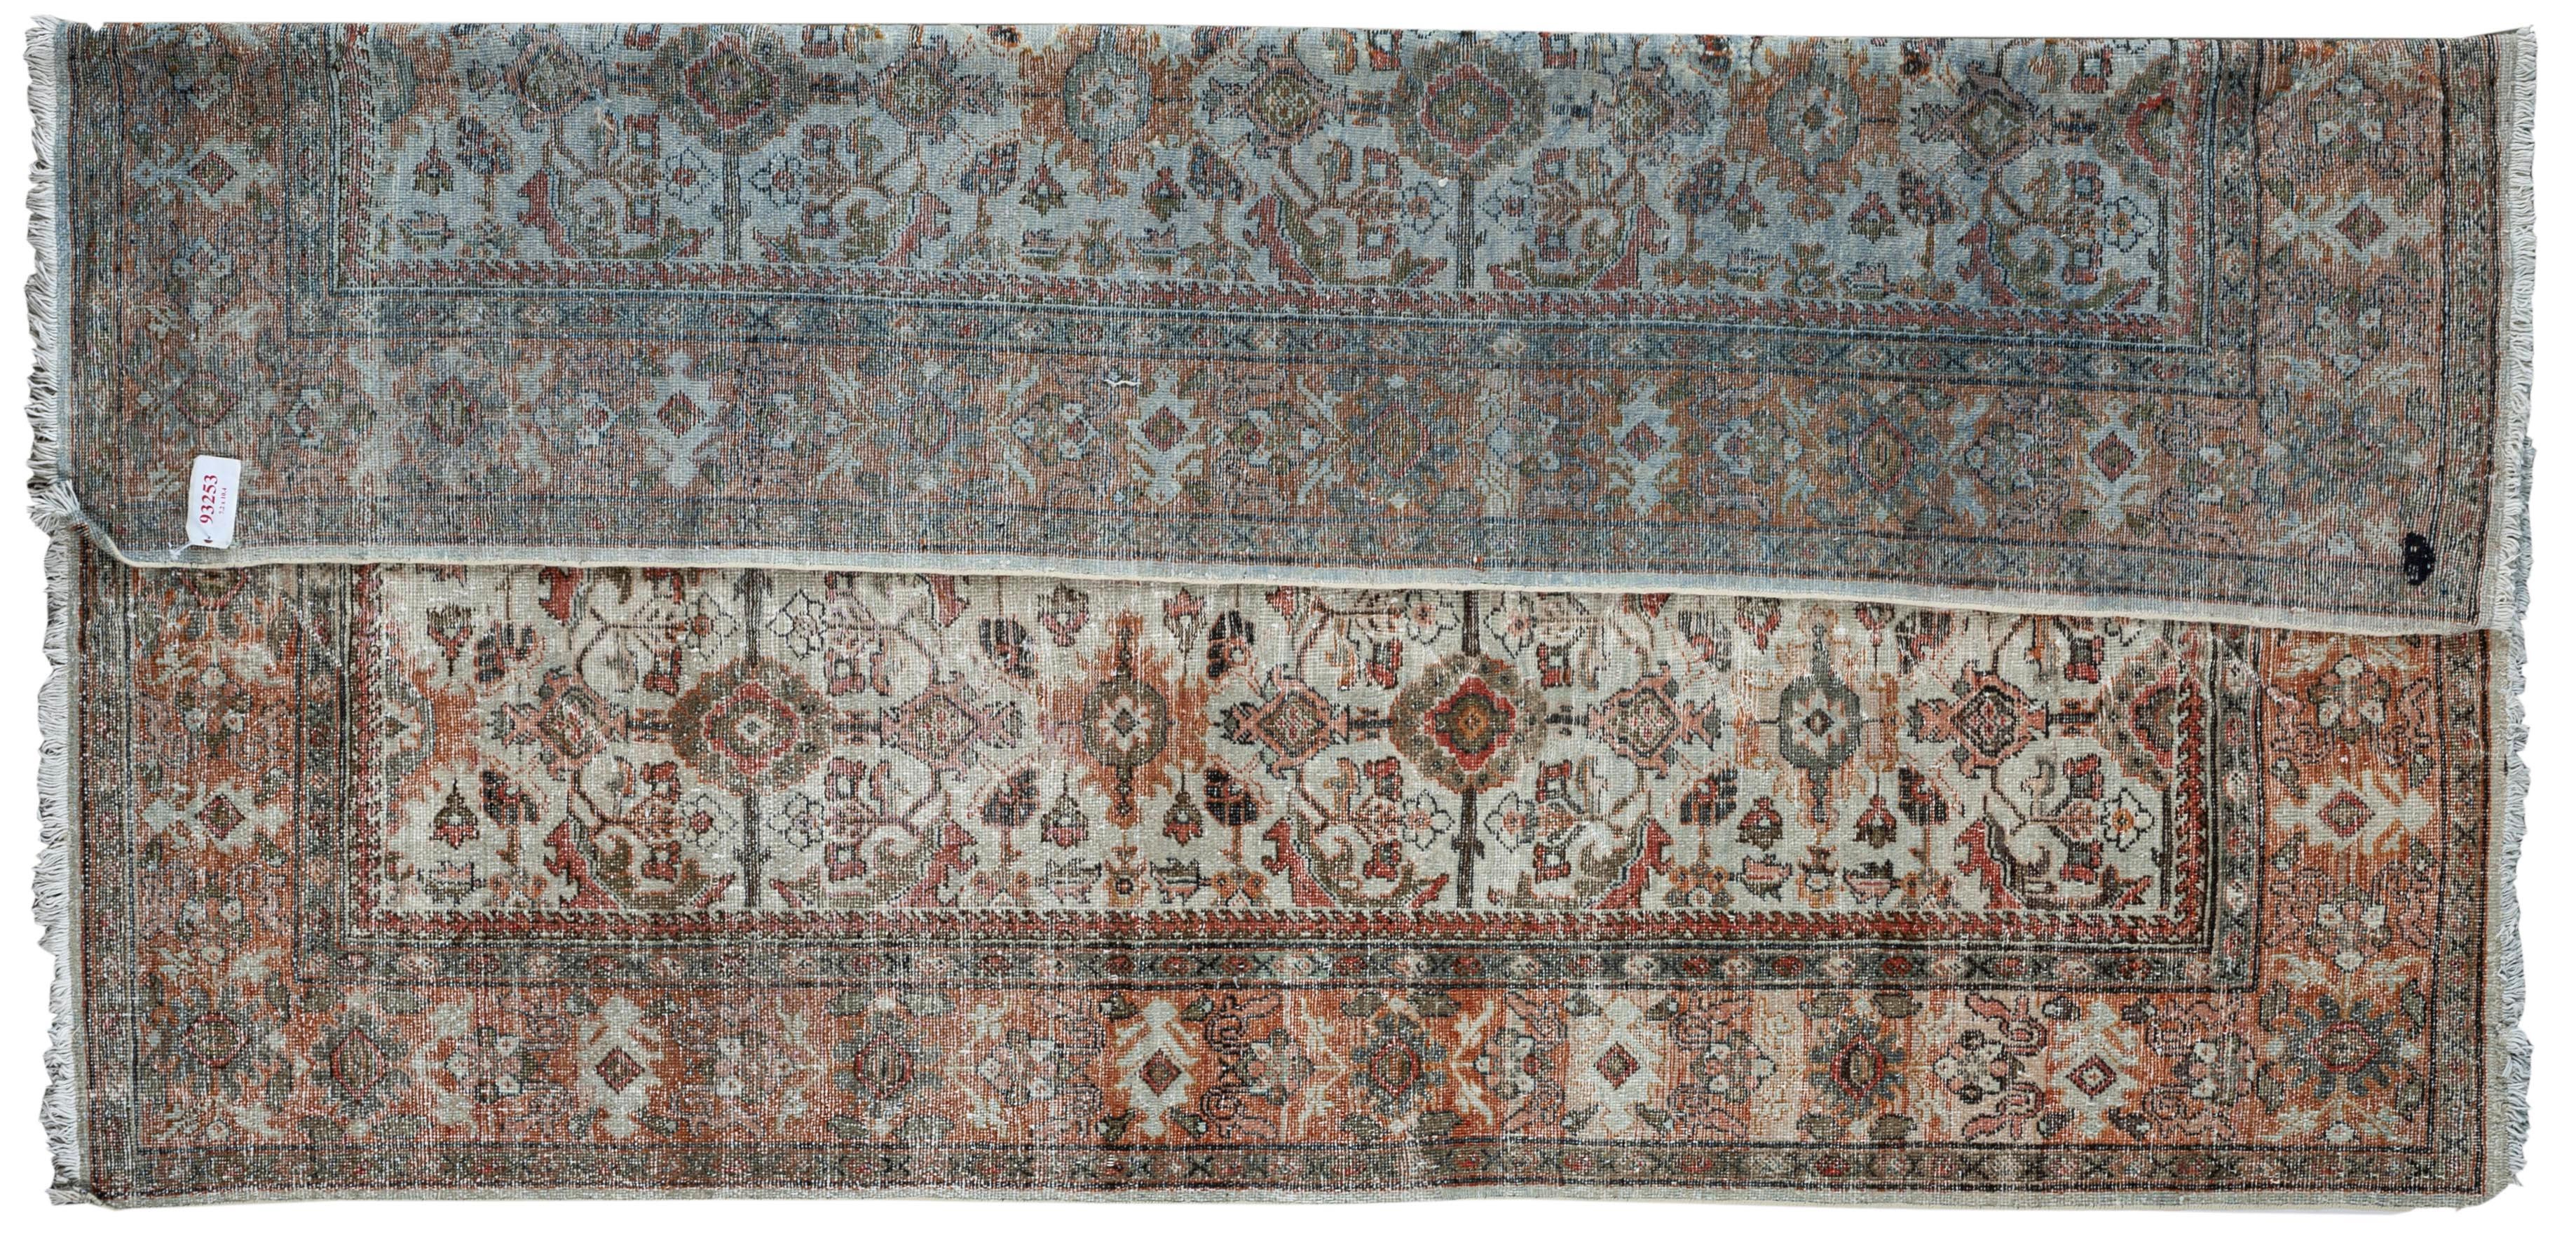 This antique distressed Mahal is an all wool Handmade and hand knotted rug. This distinctive area rug that has an all over design and wide stylized floral frame is from the 20th century and was made in Iran. The name is derived from the Mahallat